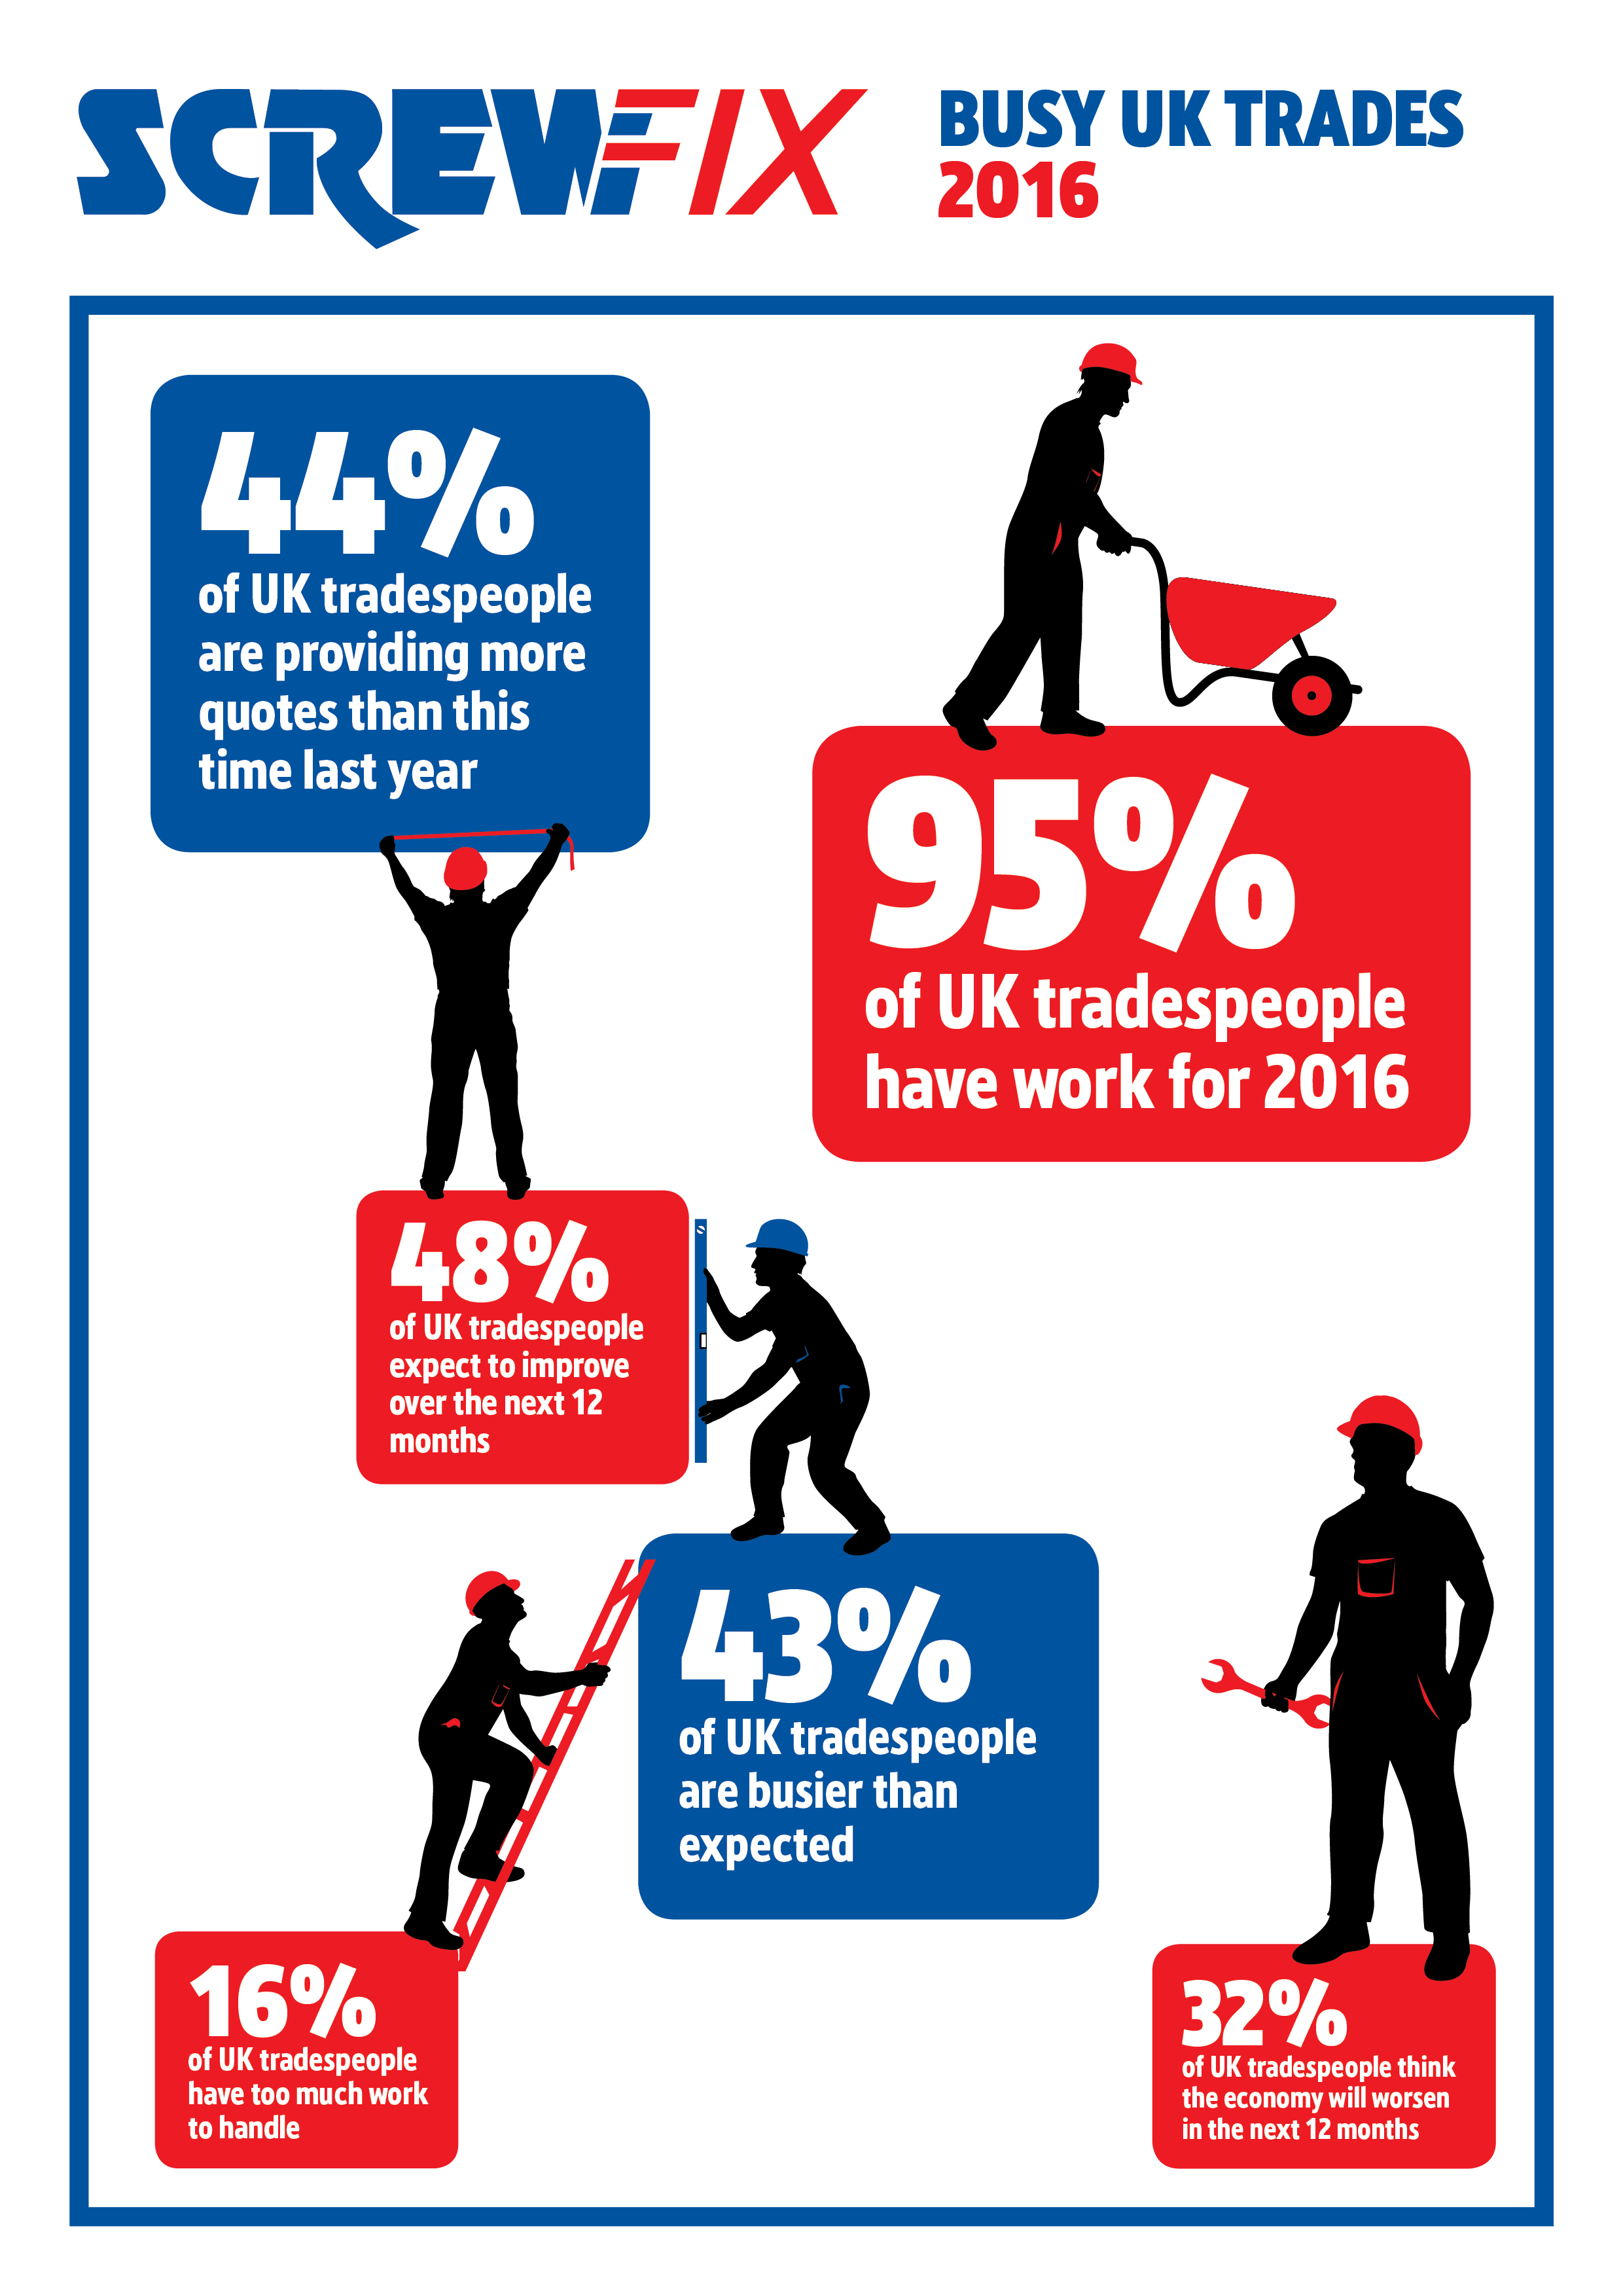 UK tradespeople quoting for more work than 12 months ago